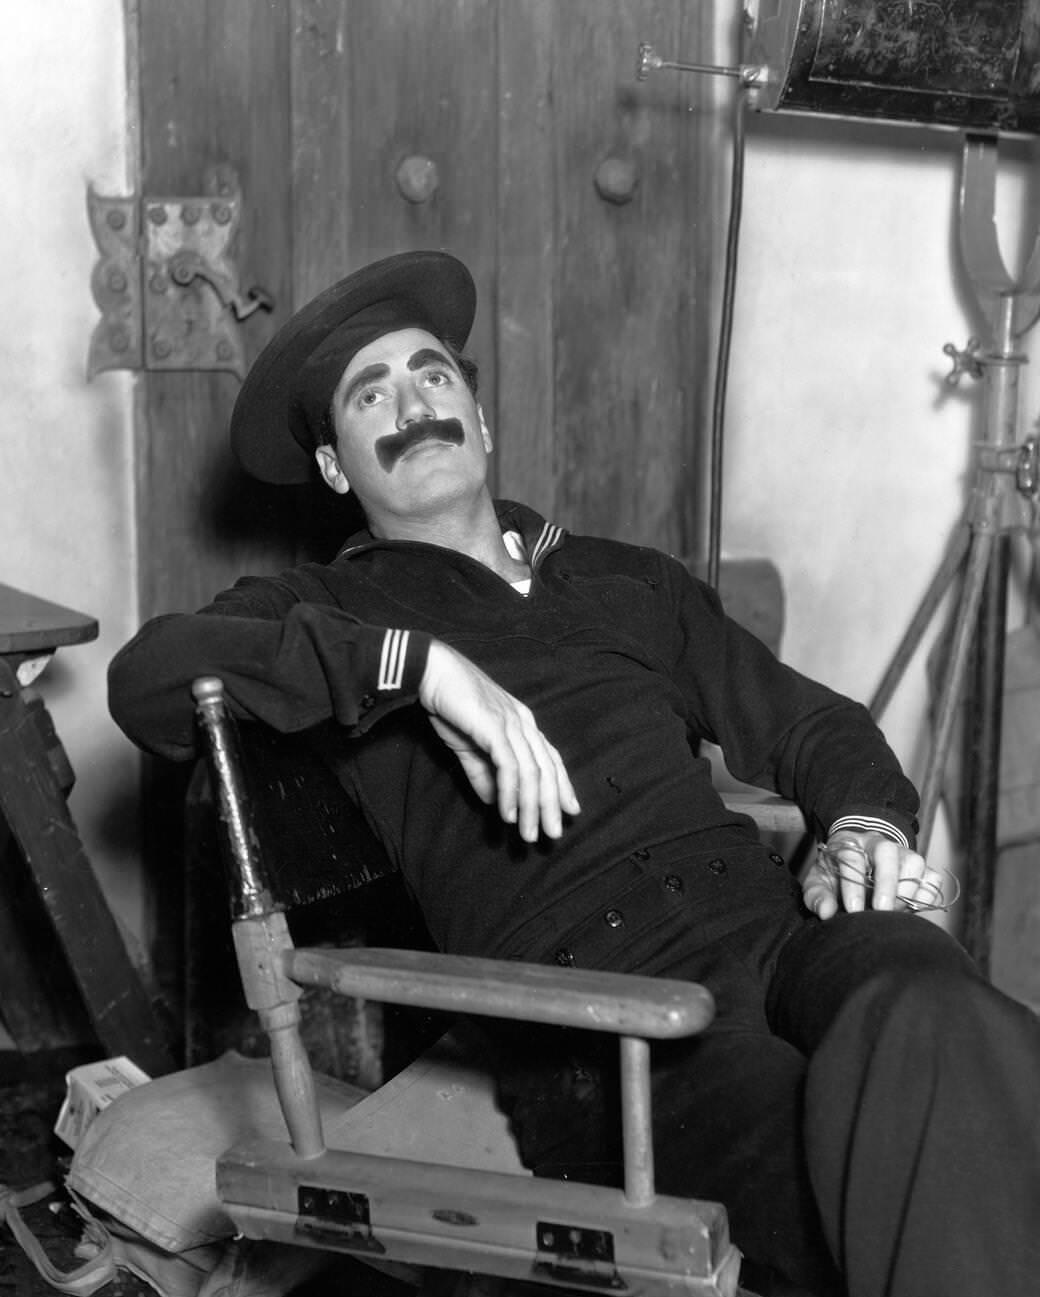 Groucho Marx in a studio publicity still for Duck Soup (1933).